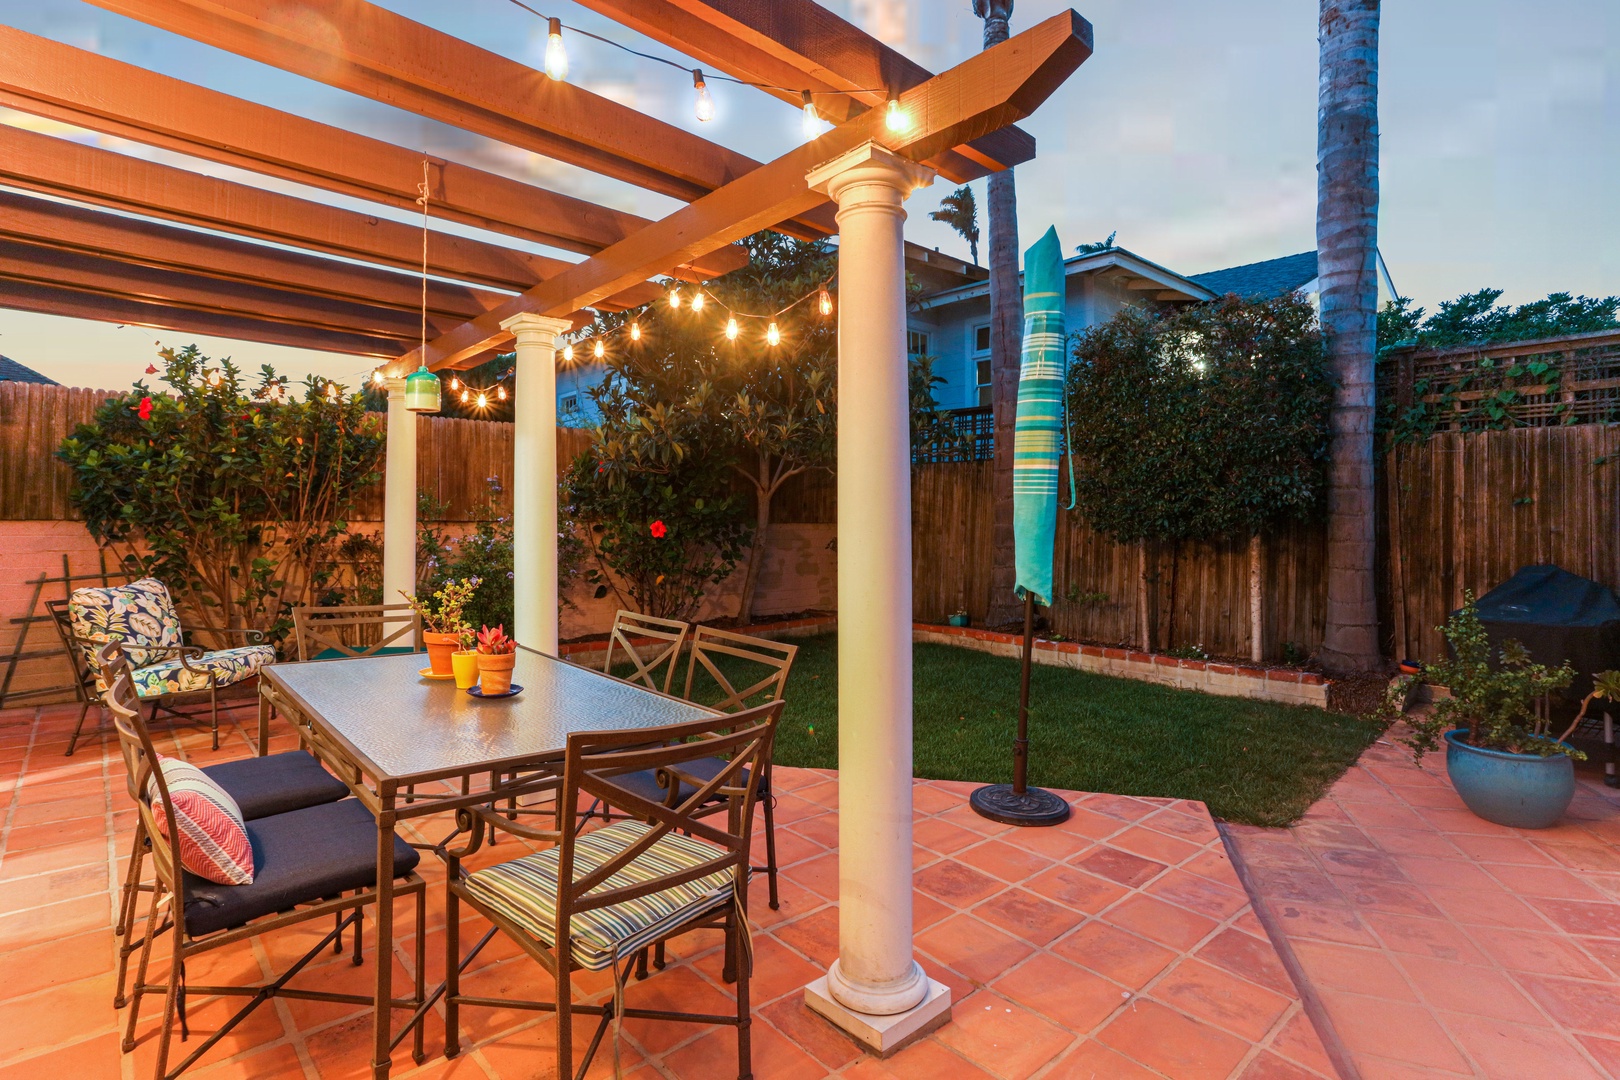 Private backyard perfect for dining outdoors or soaking in the sun